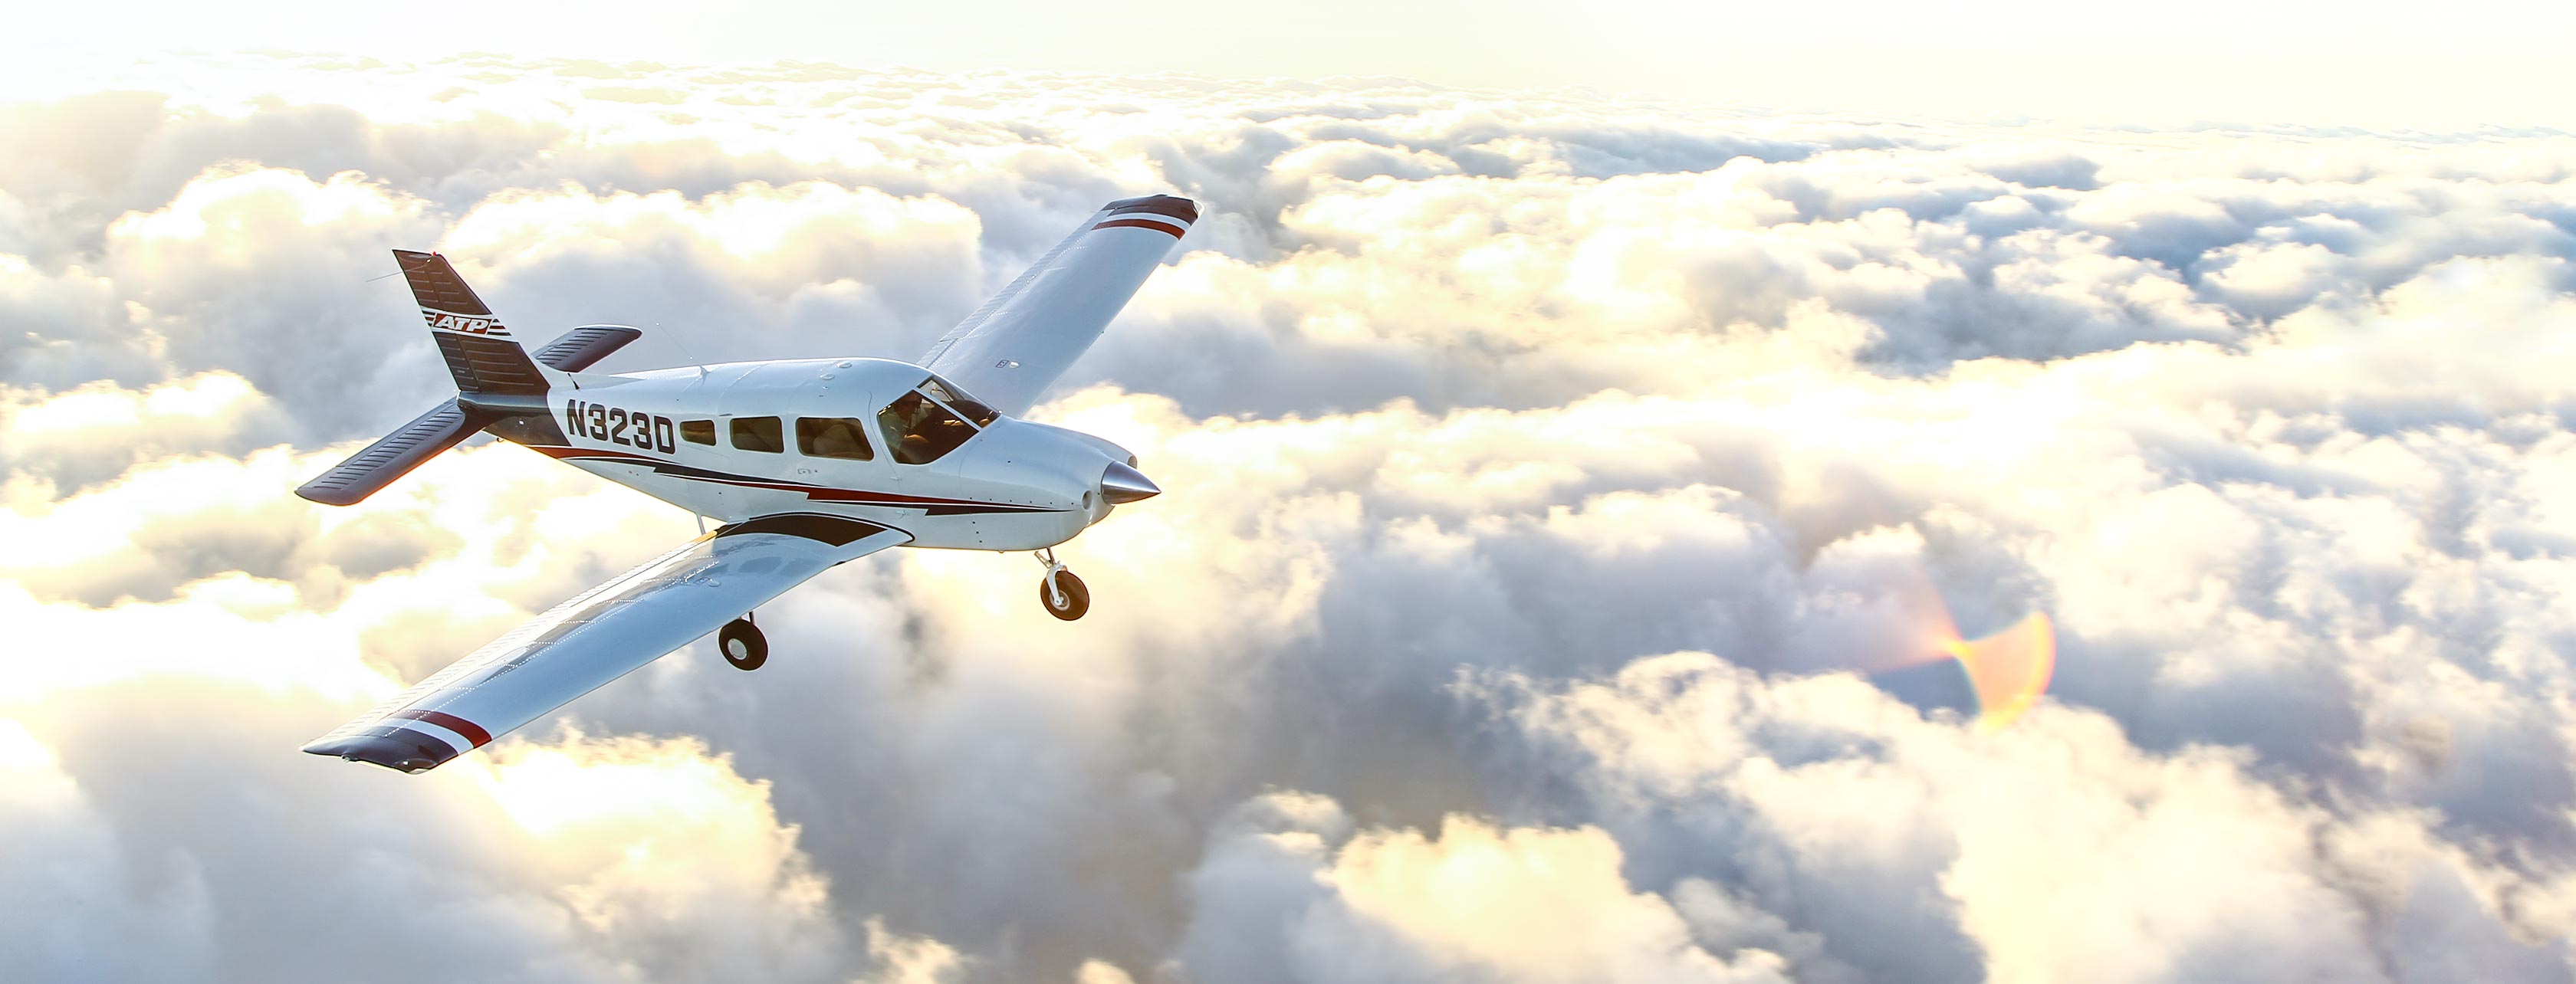 How to Become a Pilot - Learning to fly in the Piper Archer